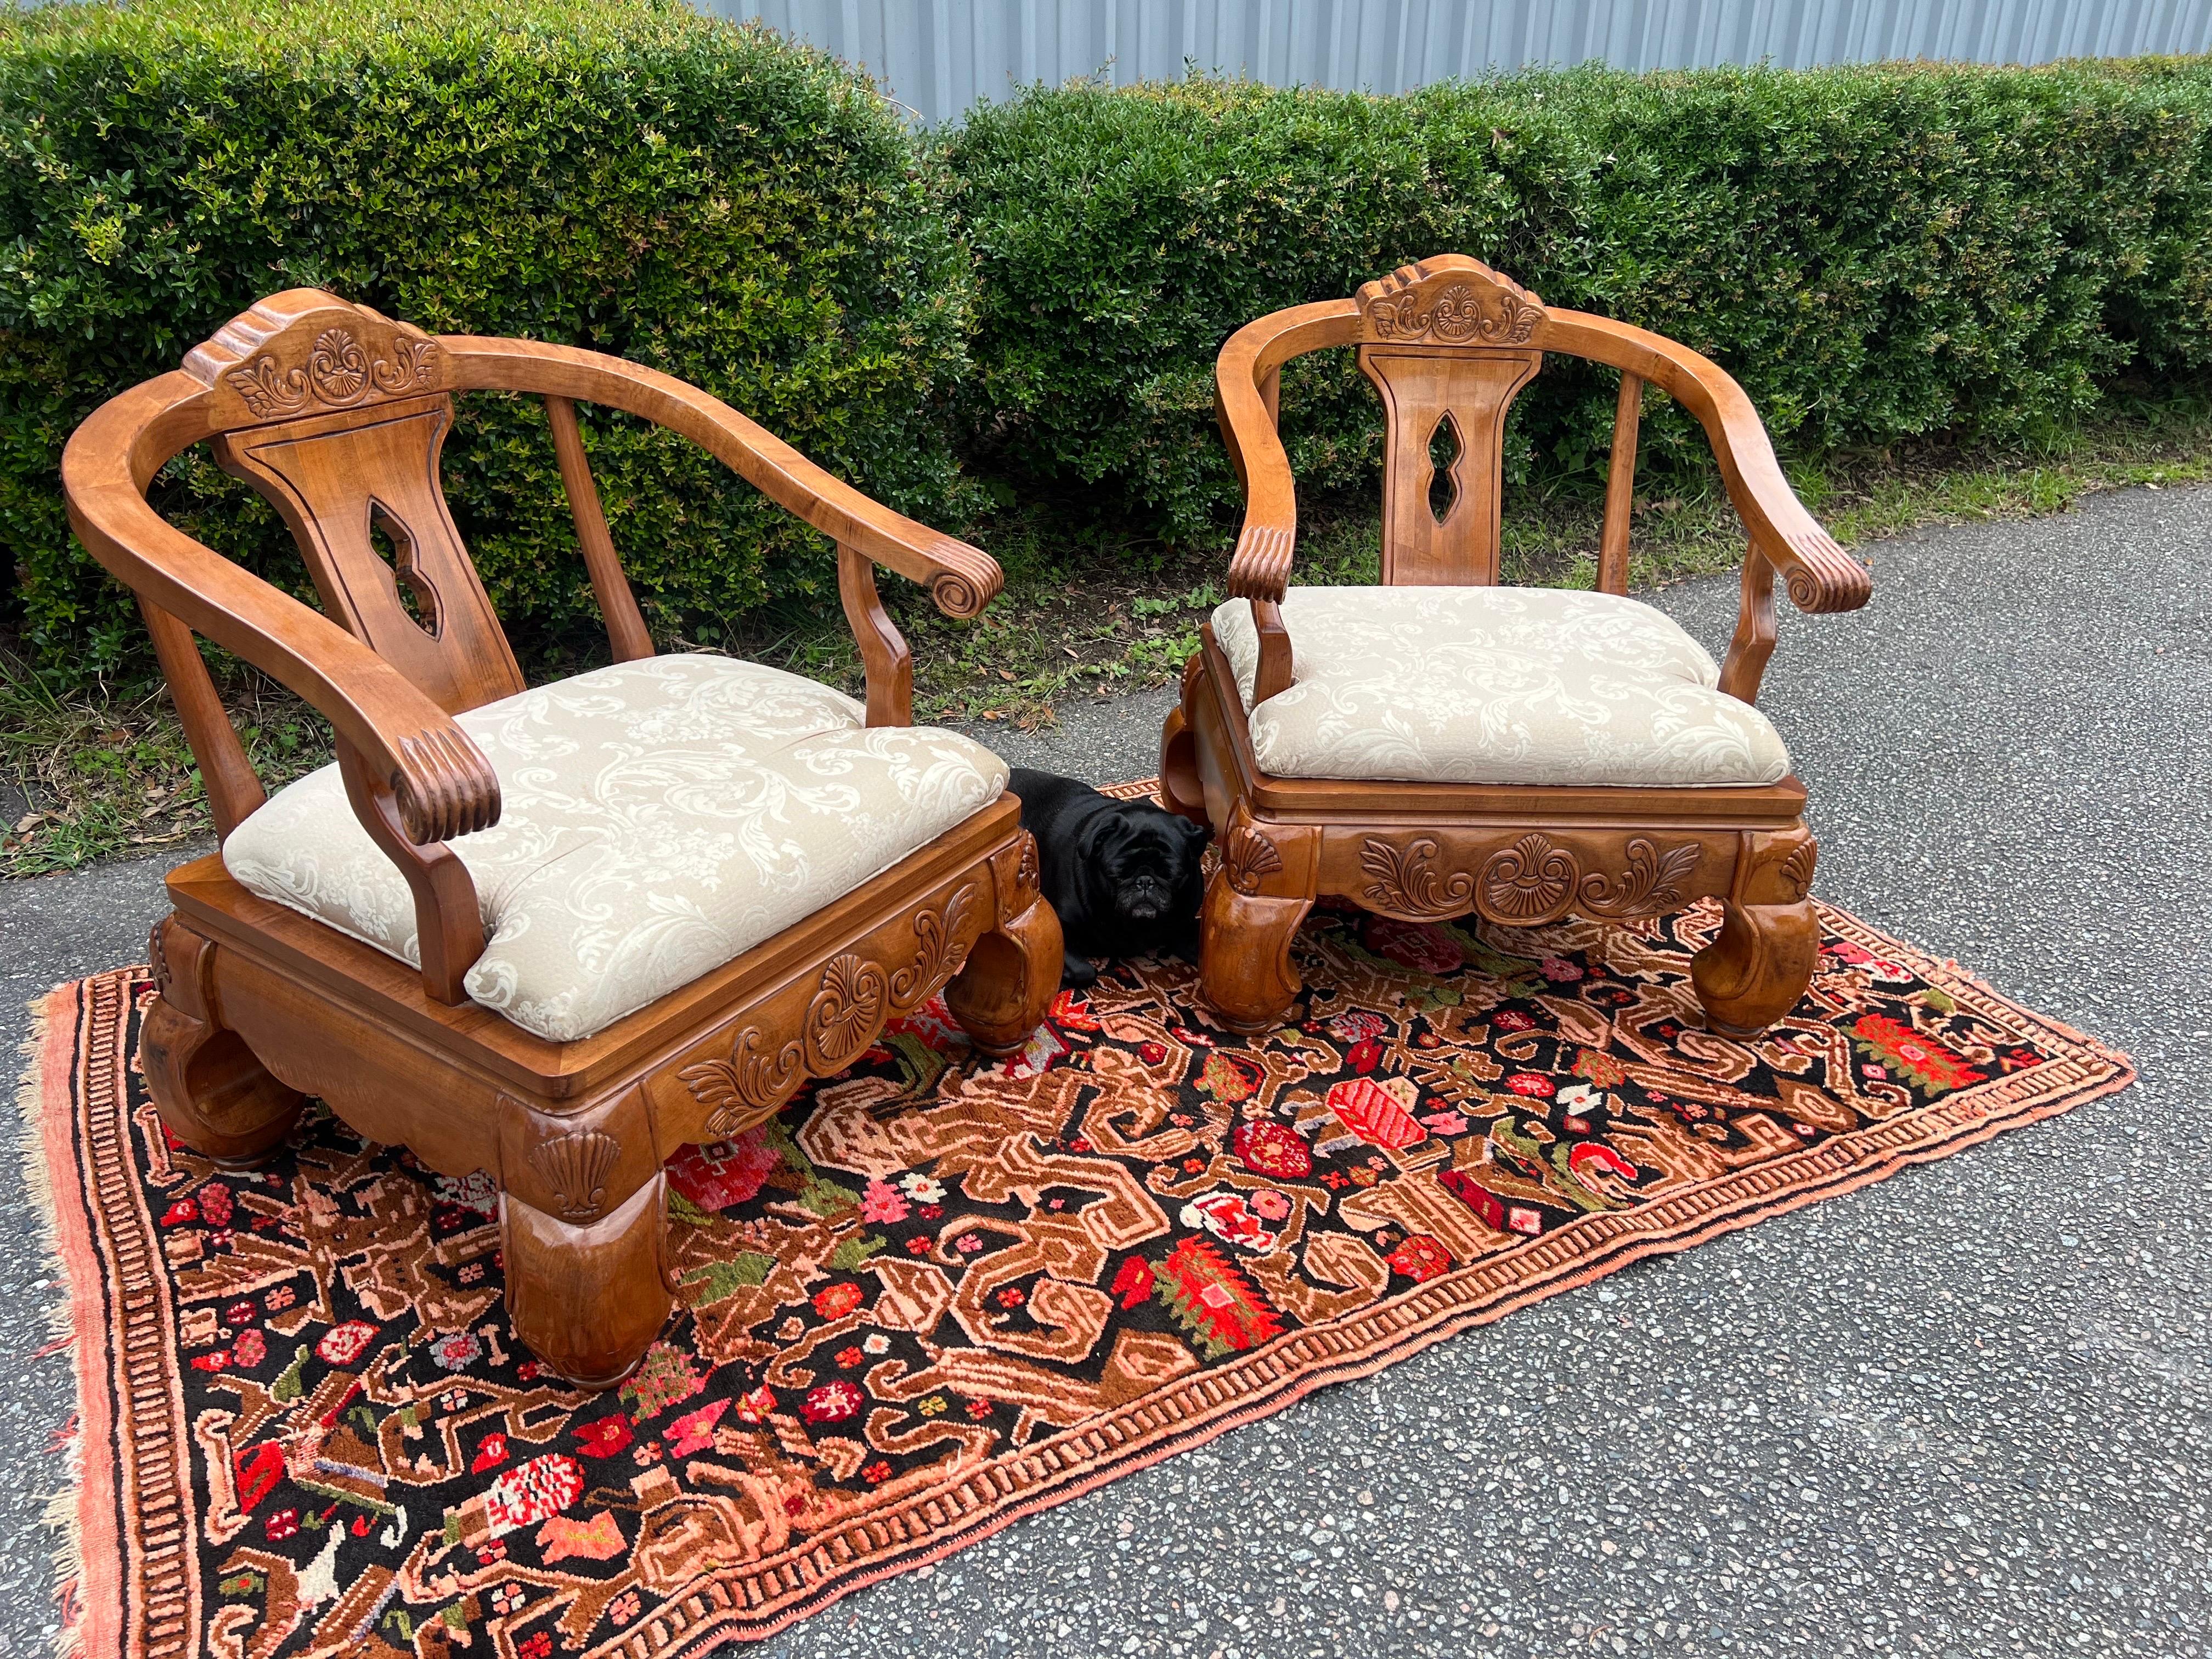 A fun Pair of Oriental Chinese Chinoiserie Oak Horseshoe Accent Chairs by Schnadig. Gorgeous Chairs in Great Vintage Condition. Solid and Firm. Wear is usual for their age. Please see photos. Overall a Gorgeous Set of Chairs that you will love